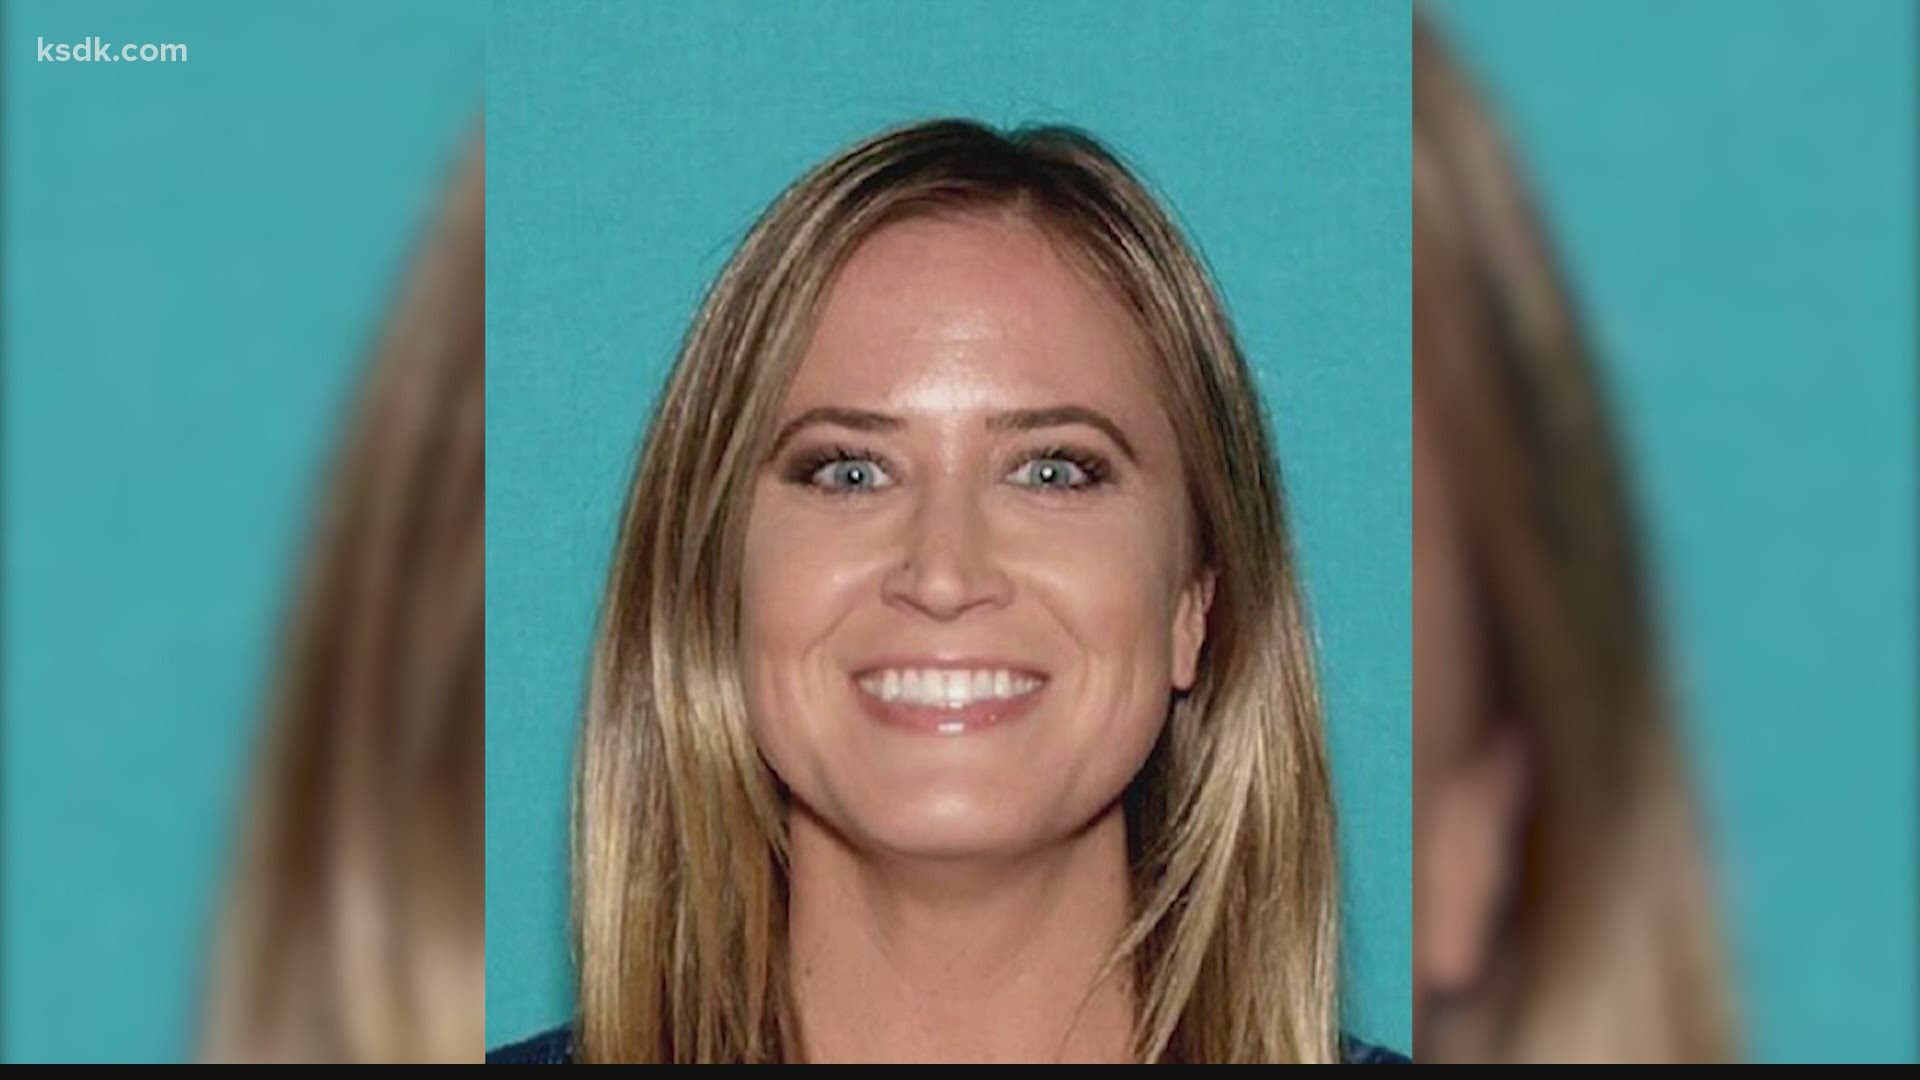 California woman missing for two weeks found safe | ksdk.com